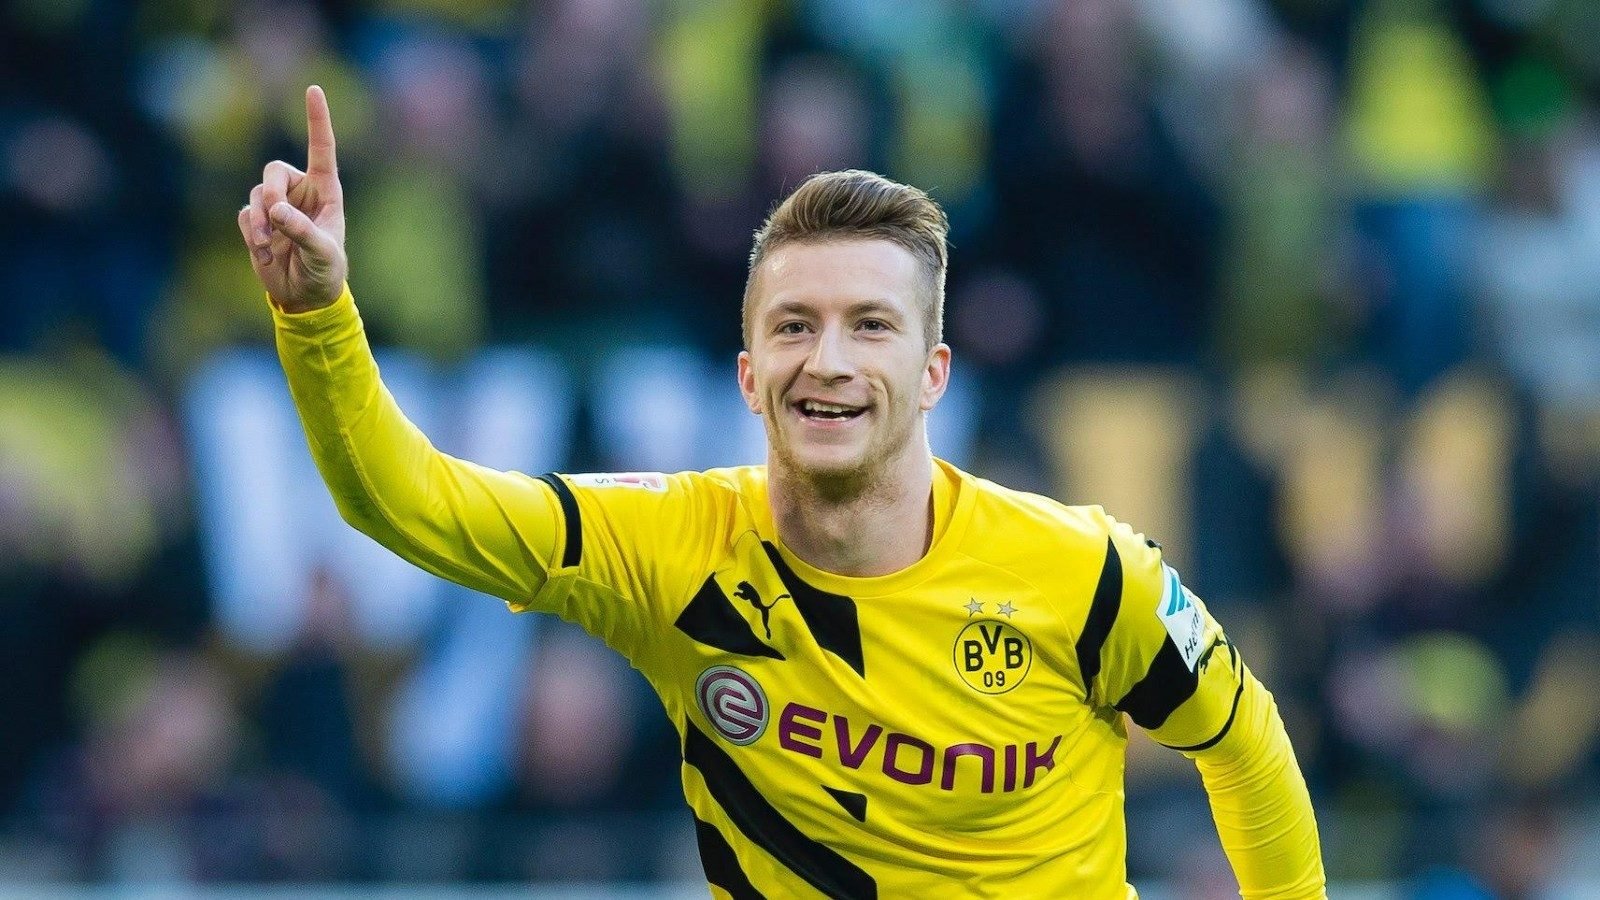 Marco Reus is one of the 5 Manchester United transfer targets